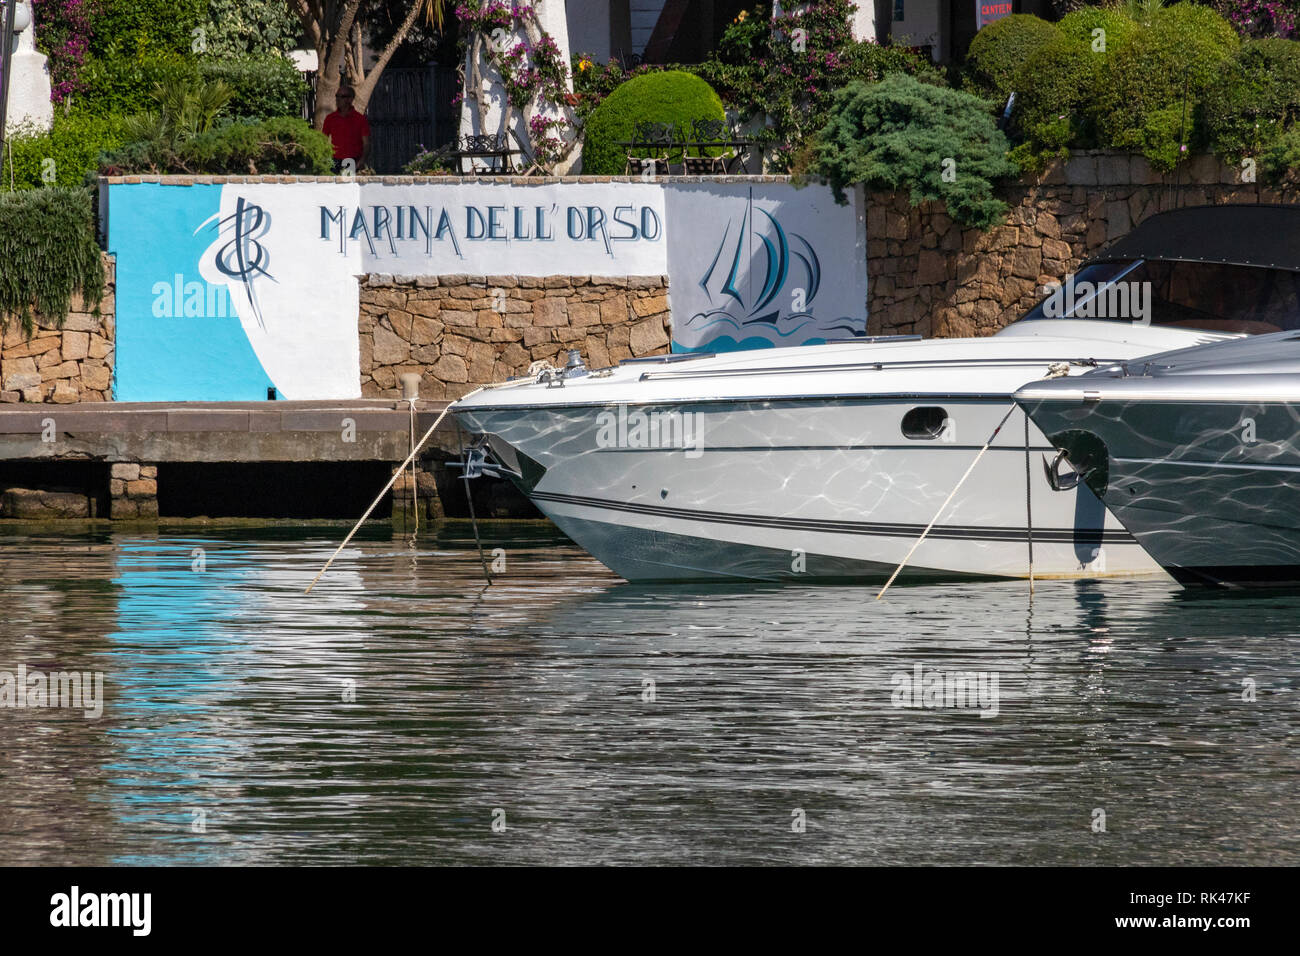 Marina dell'Orso di Poltu Quatu, in the Costa Smeralda. Close up View of Hotel and Restaurant with Moored Boat Prows and Reflections. Sardinia, Italy. Stock Photo